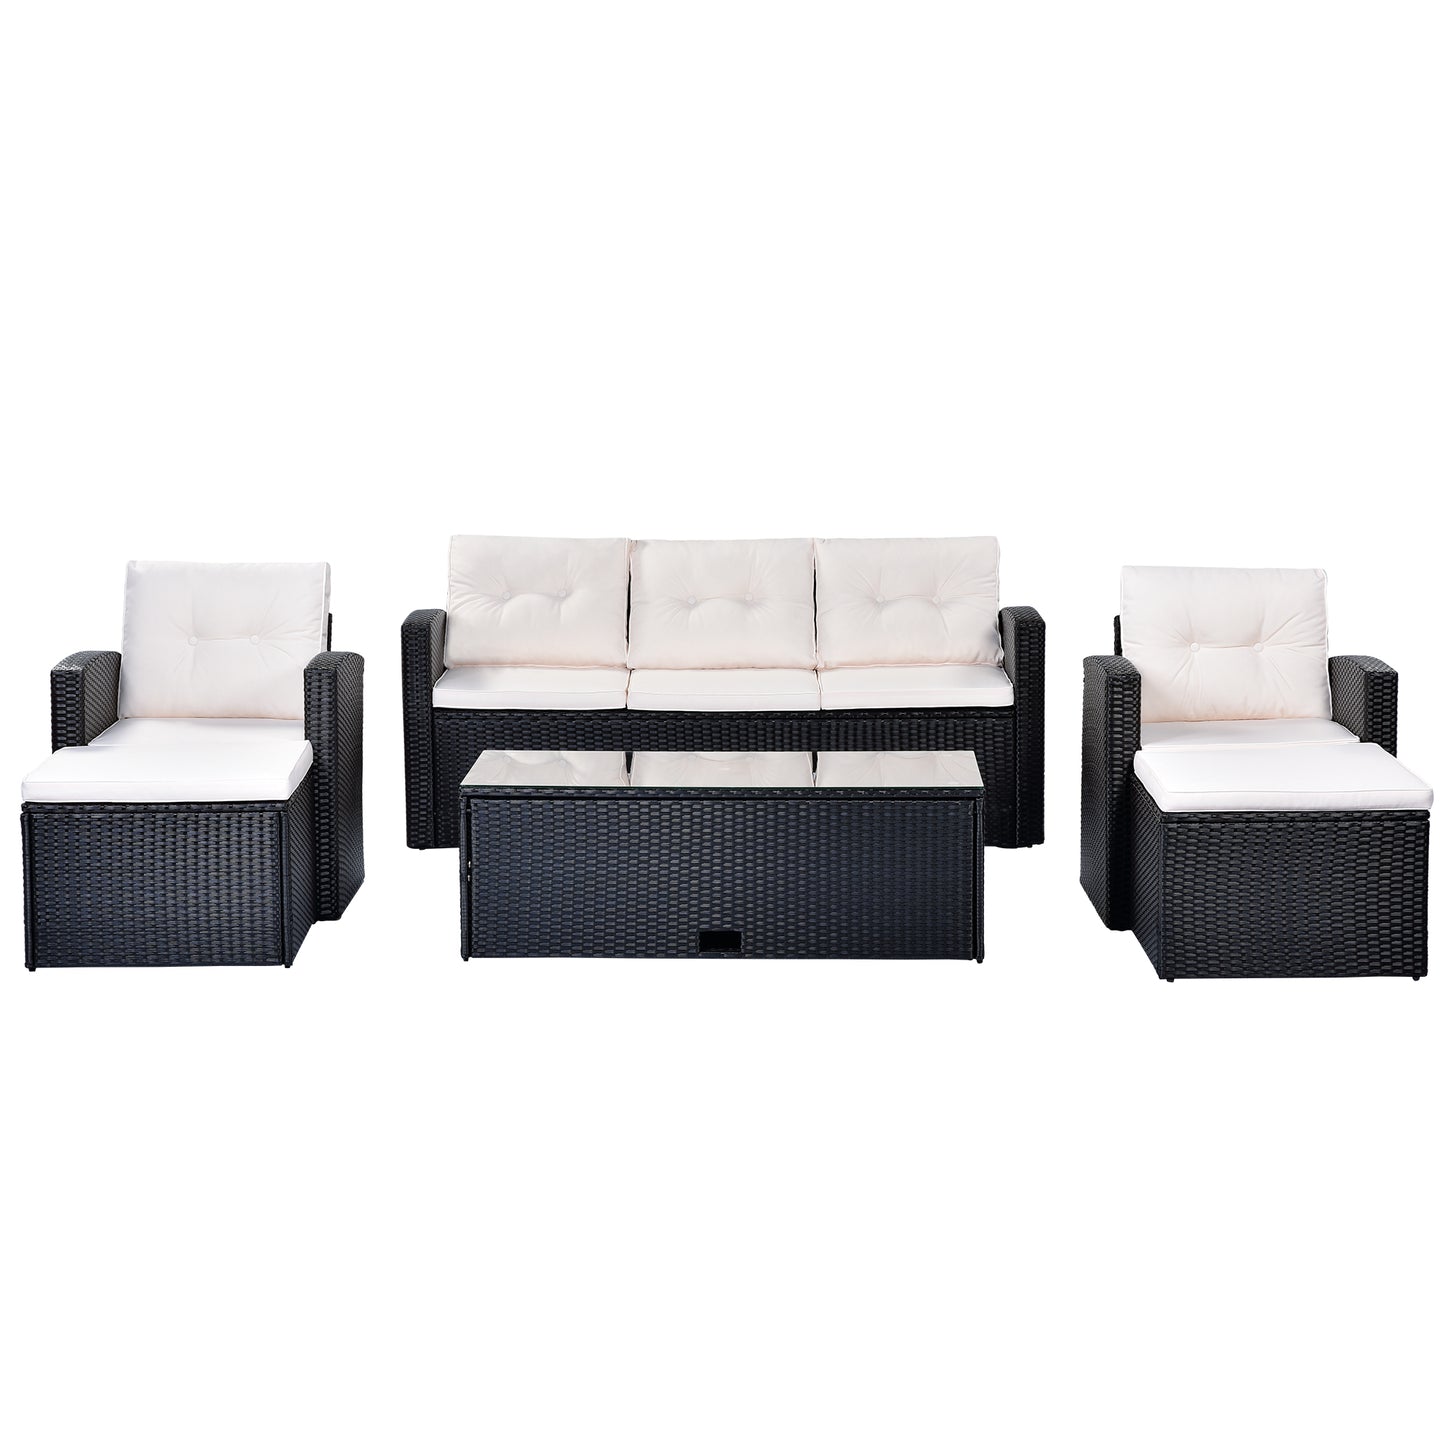 GO 6-piece All-Weather Wicker PE rattan Patio Outdoor Dining Conversation Sectional Set with coffee table, wicker sofas, ottomans, removable cushions (Black wicker, Beige cushion)